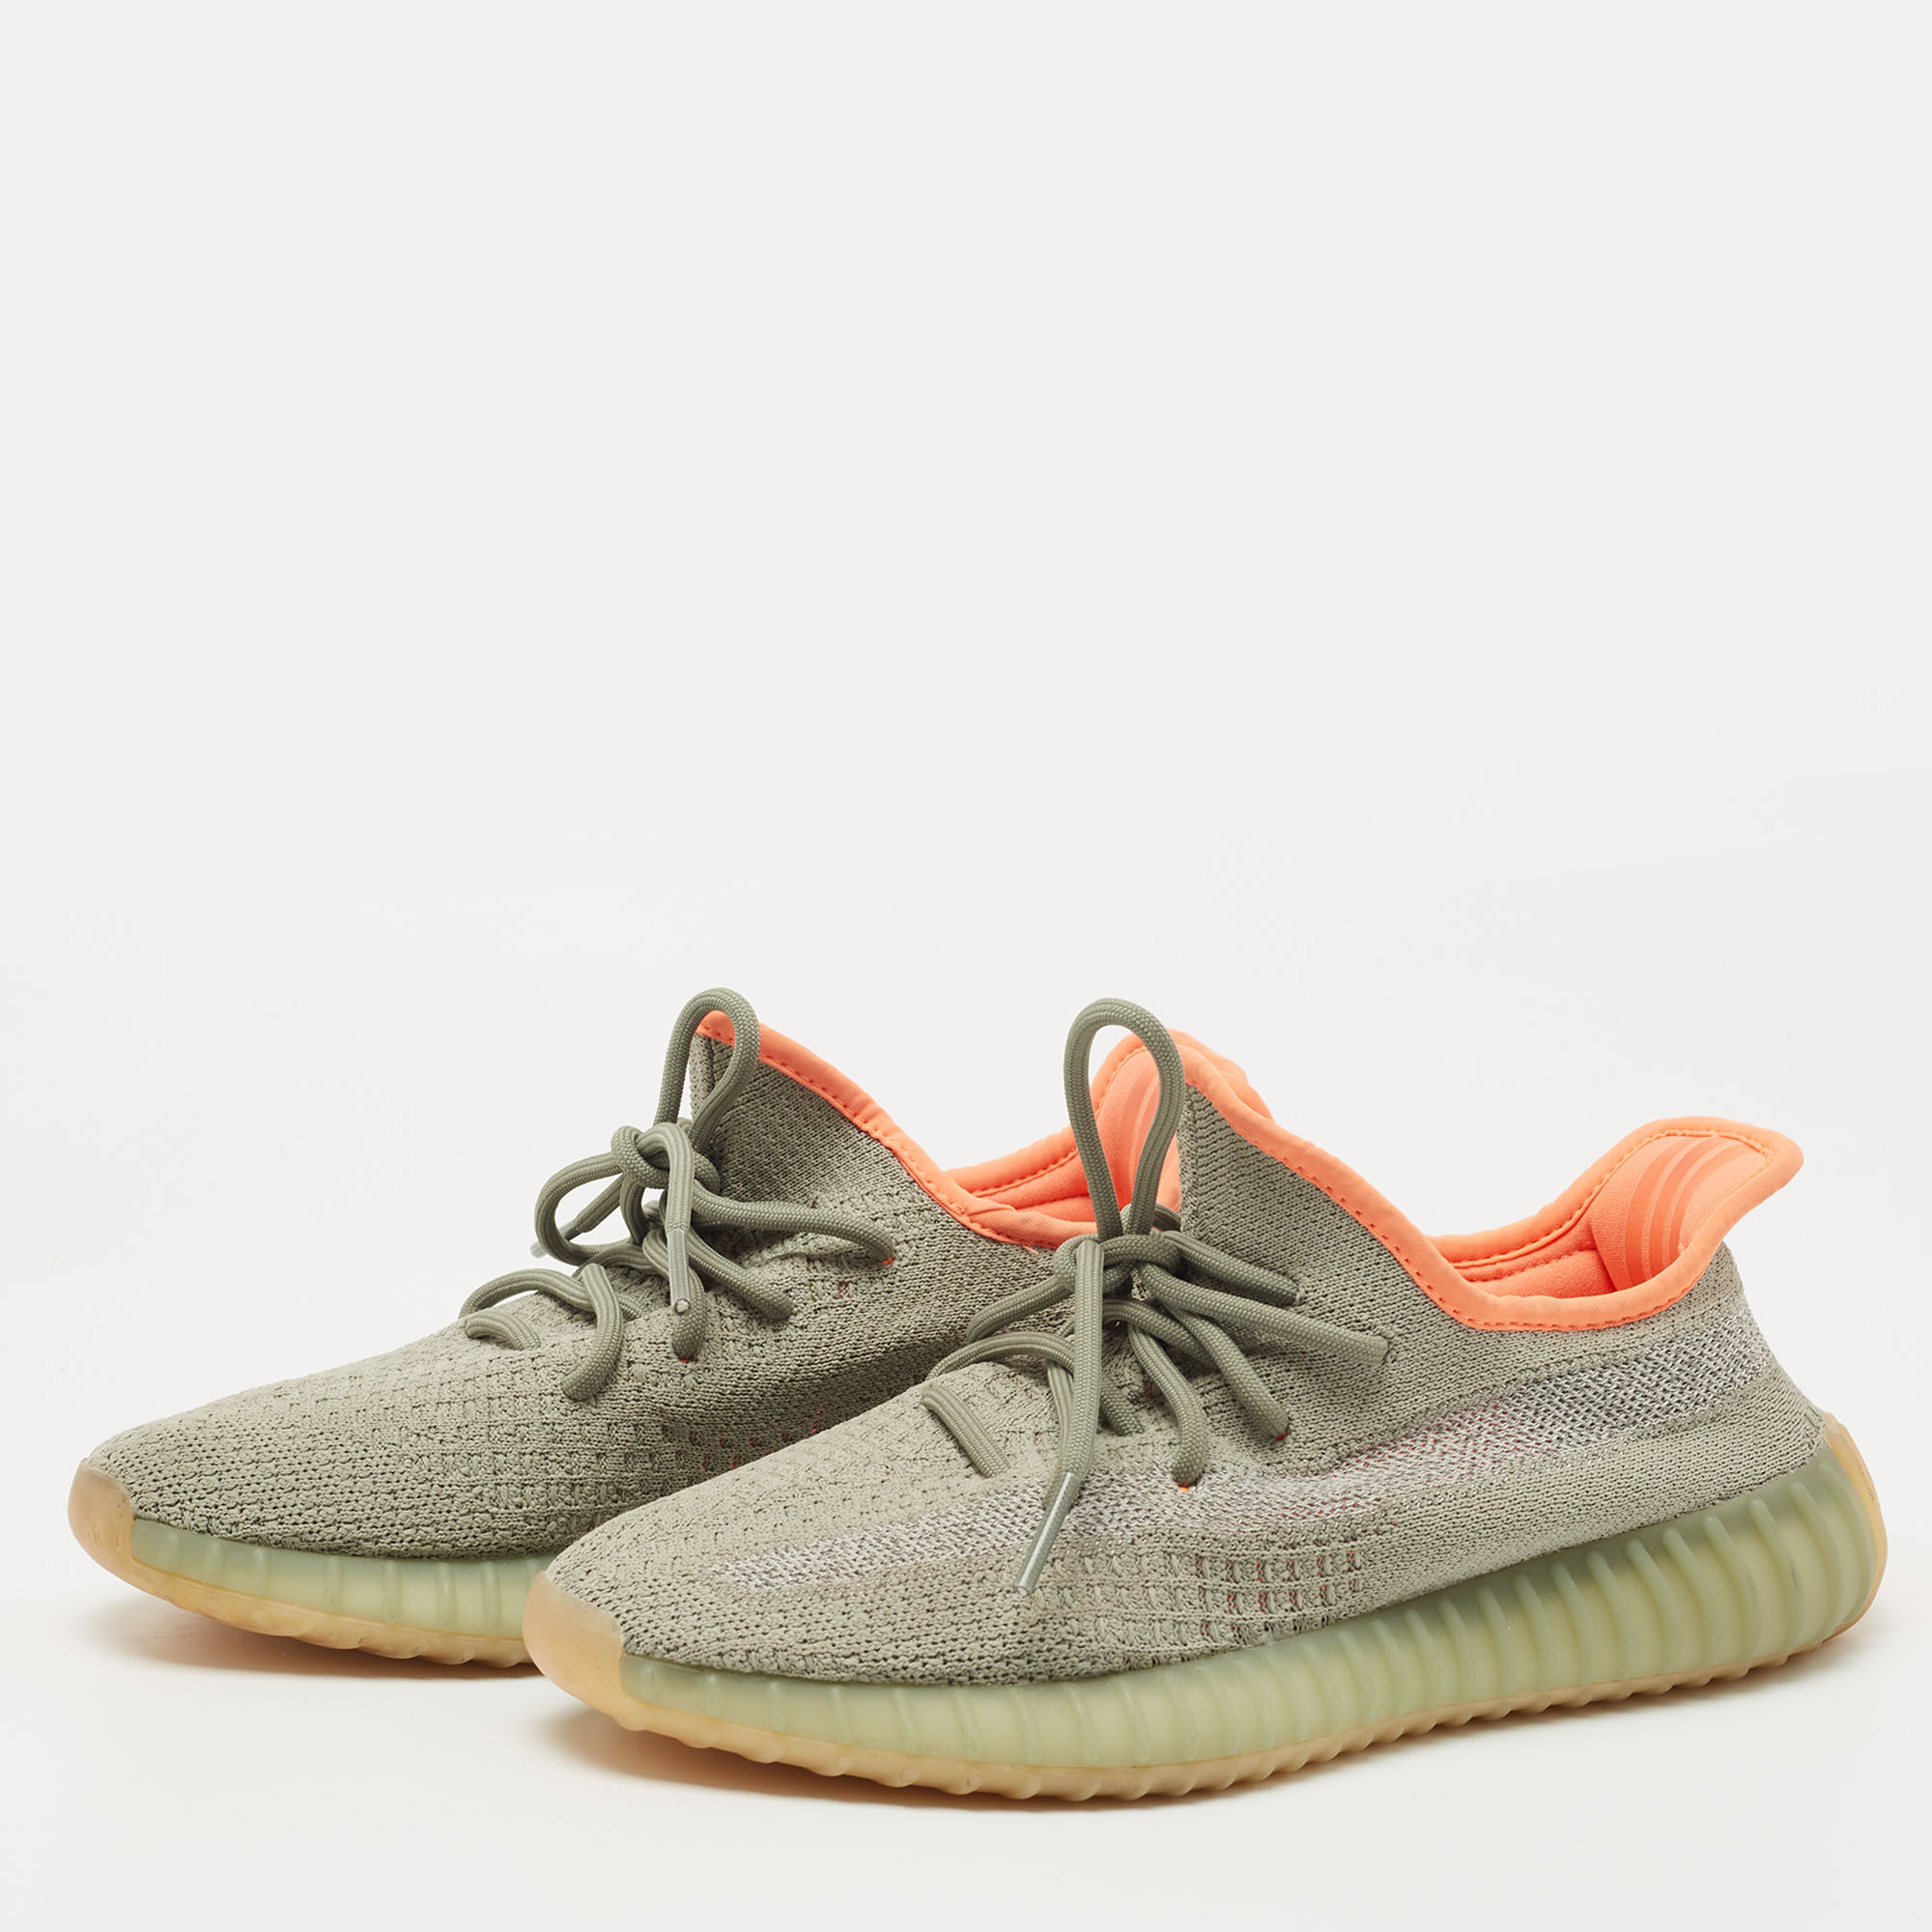 

Yeezy x Adidas Green/Grey Knit Fabric Boost 350 V2 Desert Sage Sneakers Size  1/3